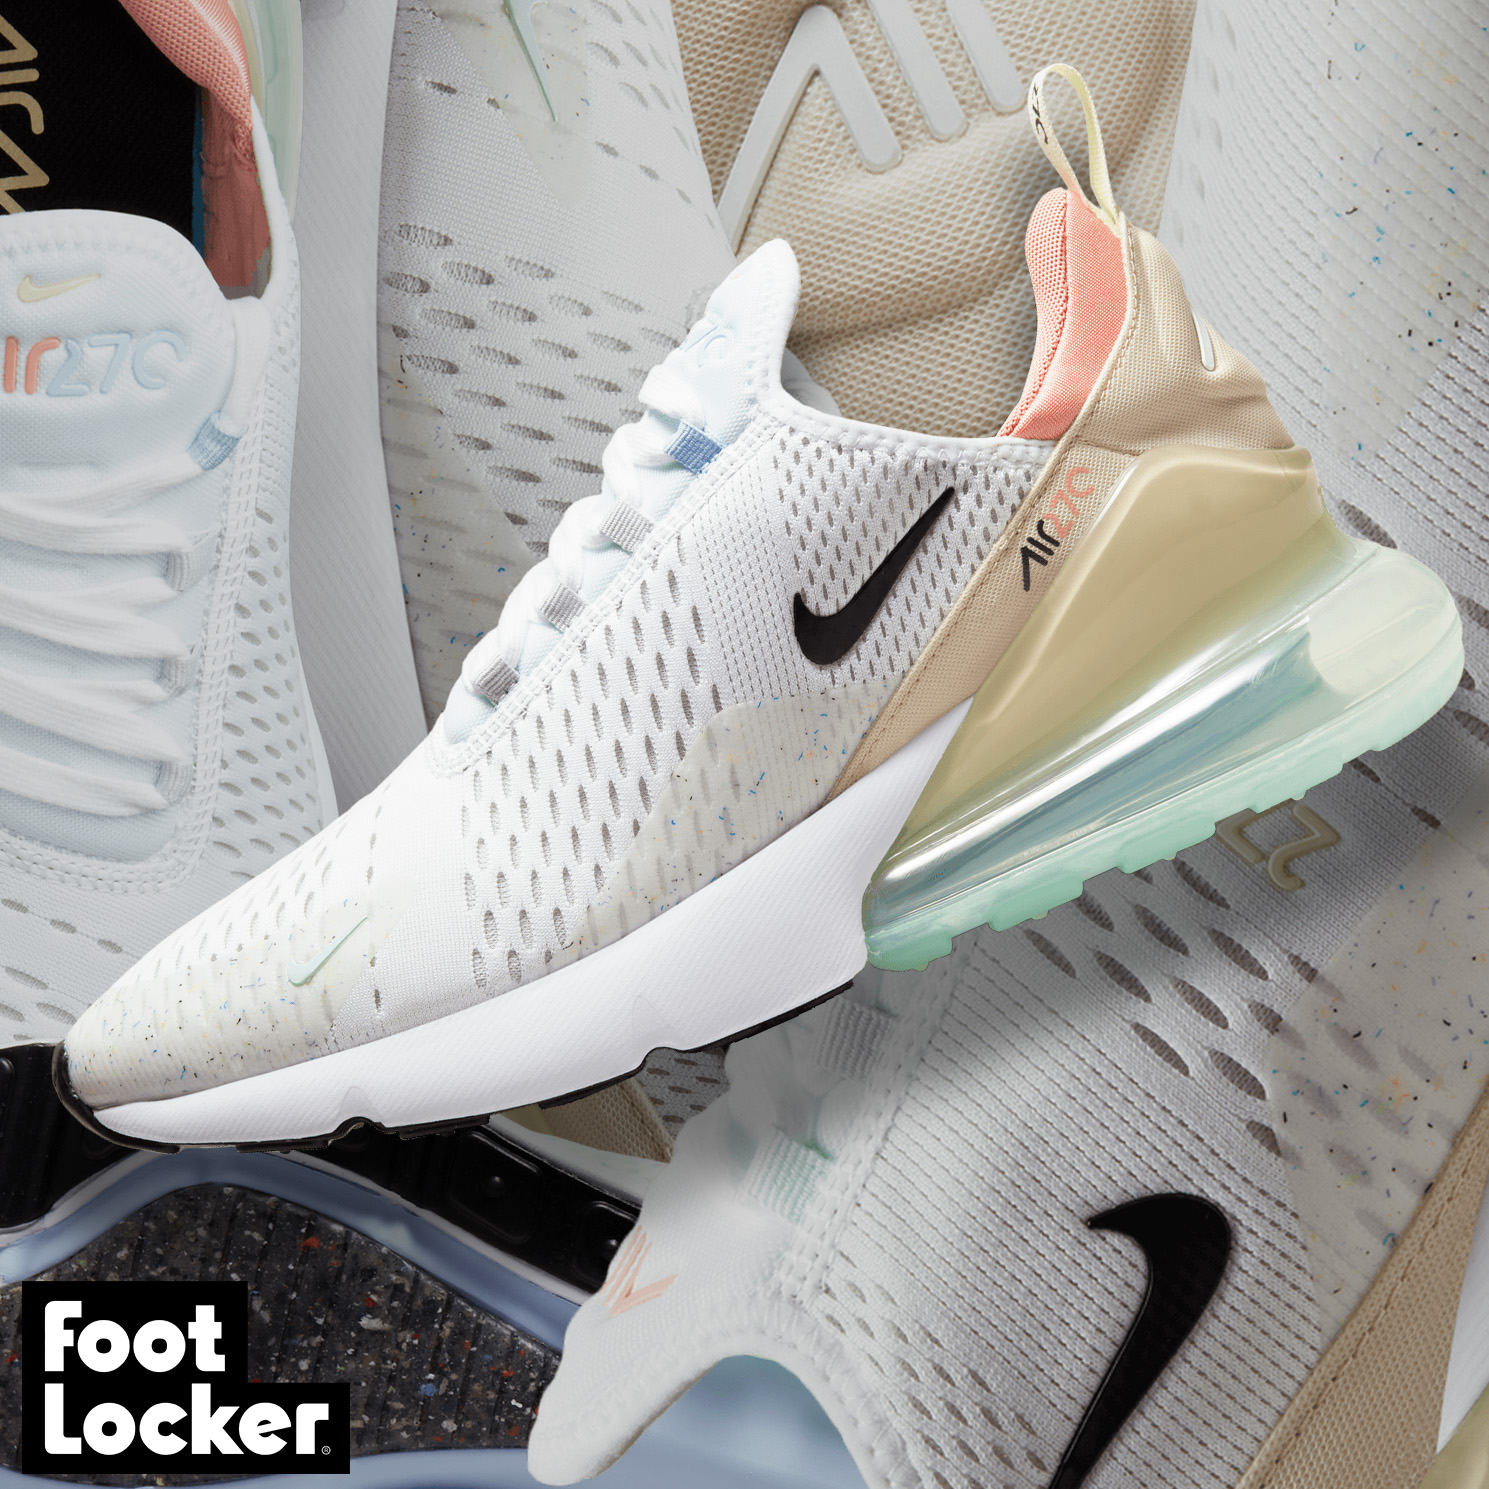 Foot Locker on X: "Spring ready #Nike Air Max 270 available online + select stores Shop: https://t.co/mWgE4B8s70 https://t.co/dFvSGqlasw" / X